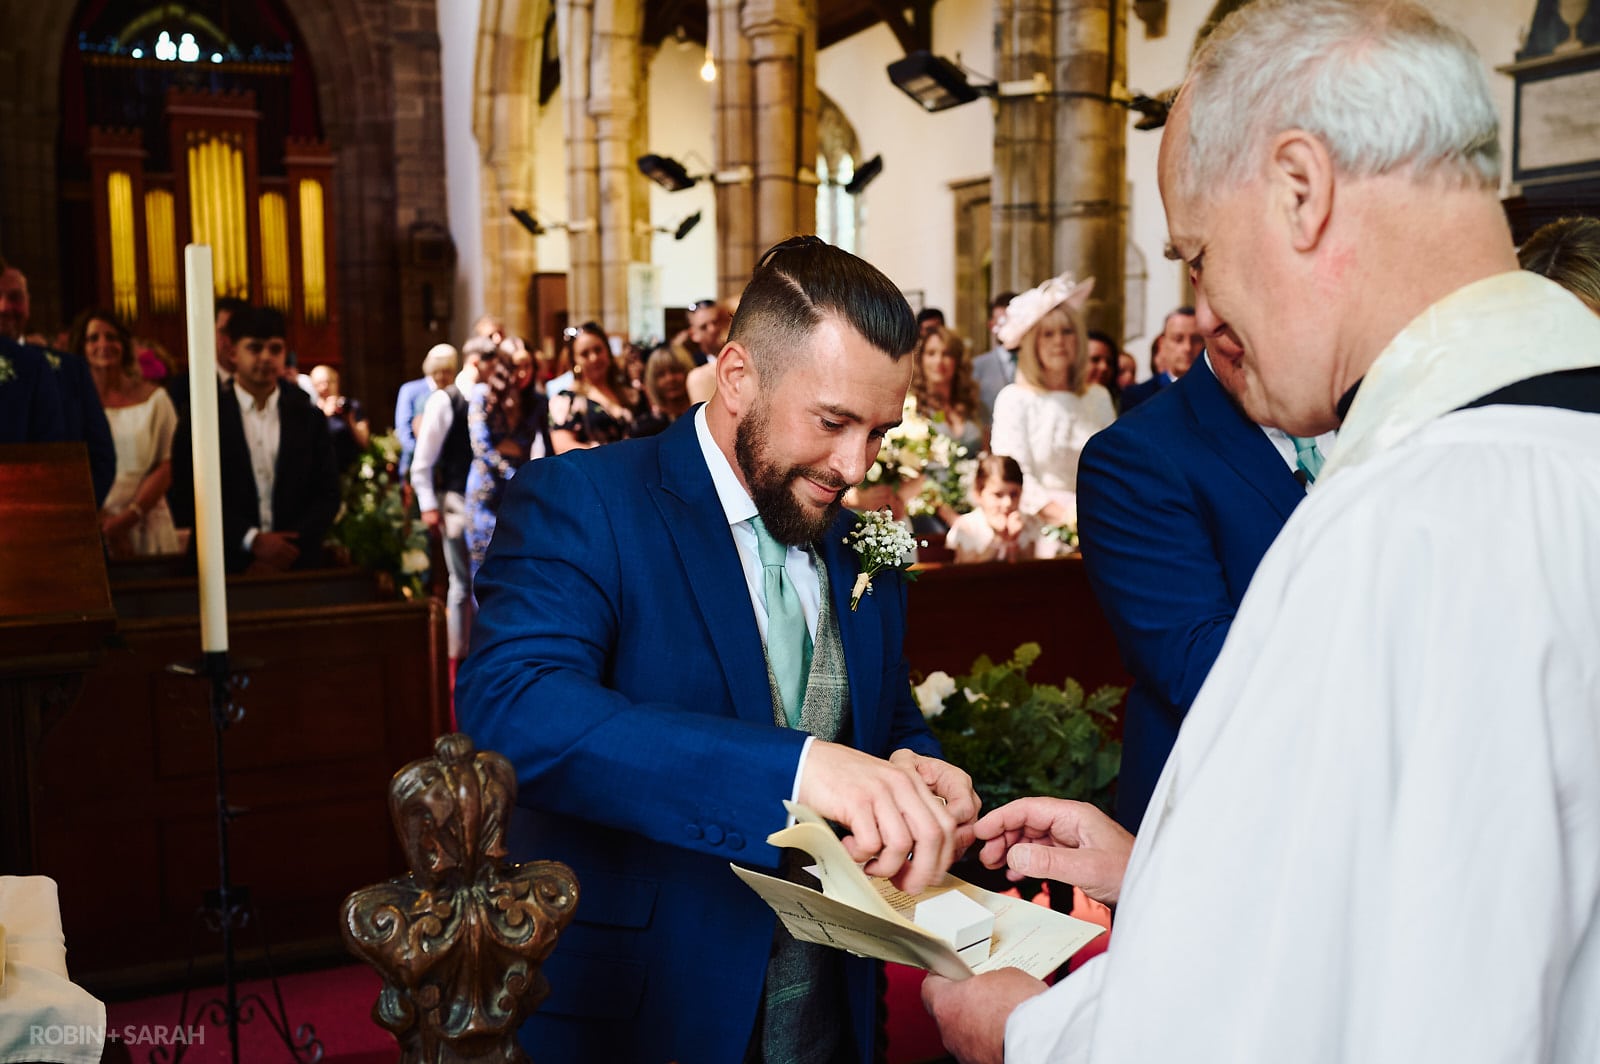 Best man hands wedding rings over to vicar at St Botolph's church Newbold-on-Avon